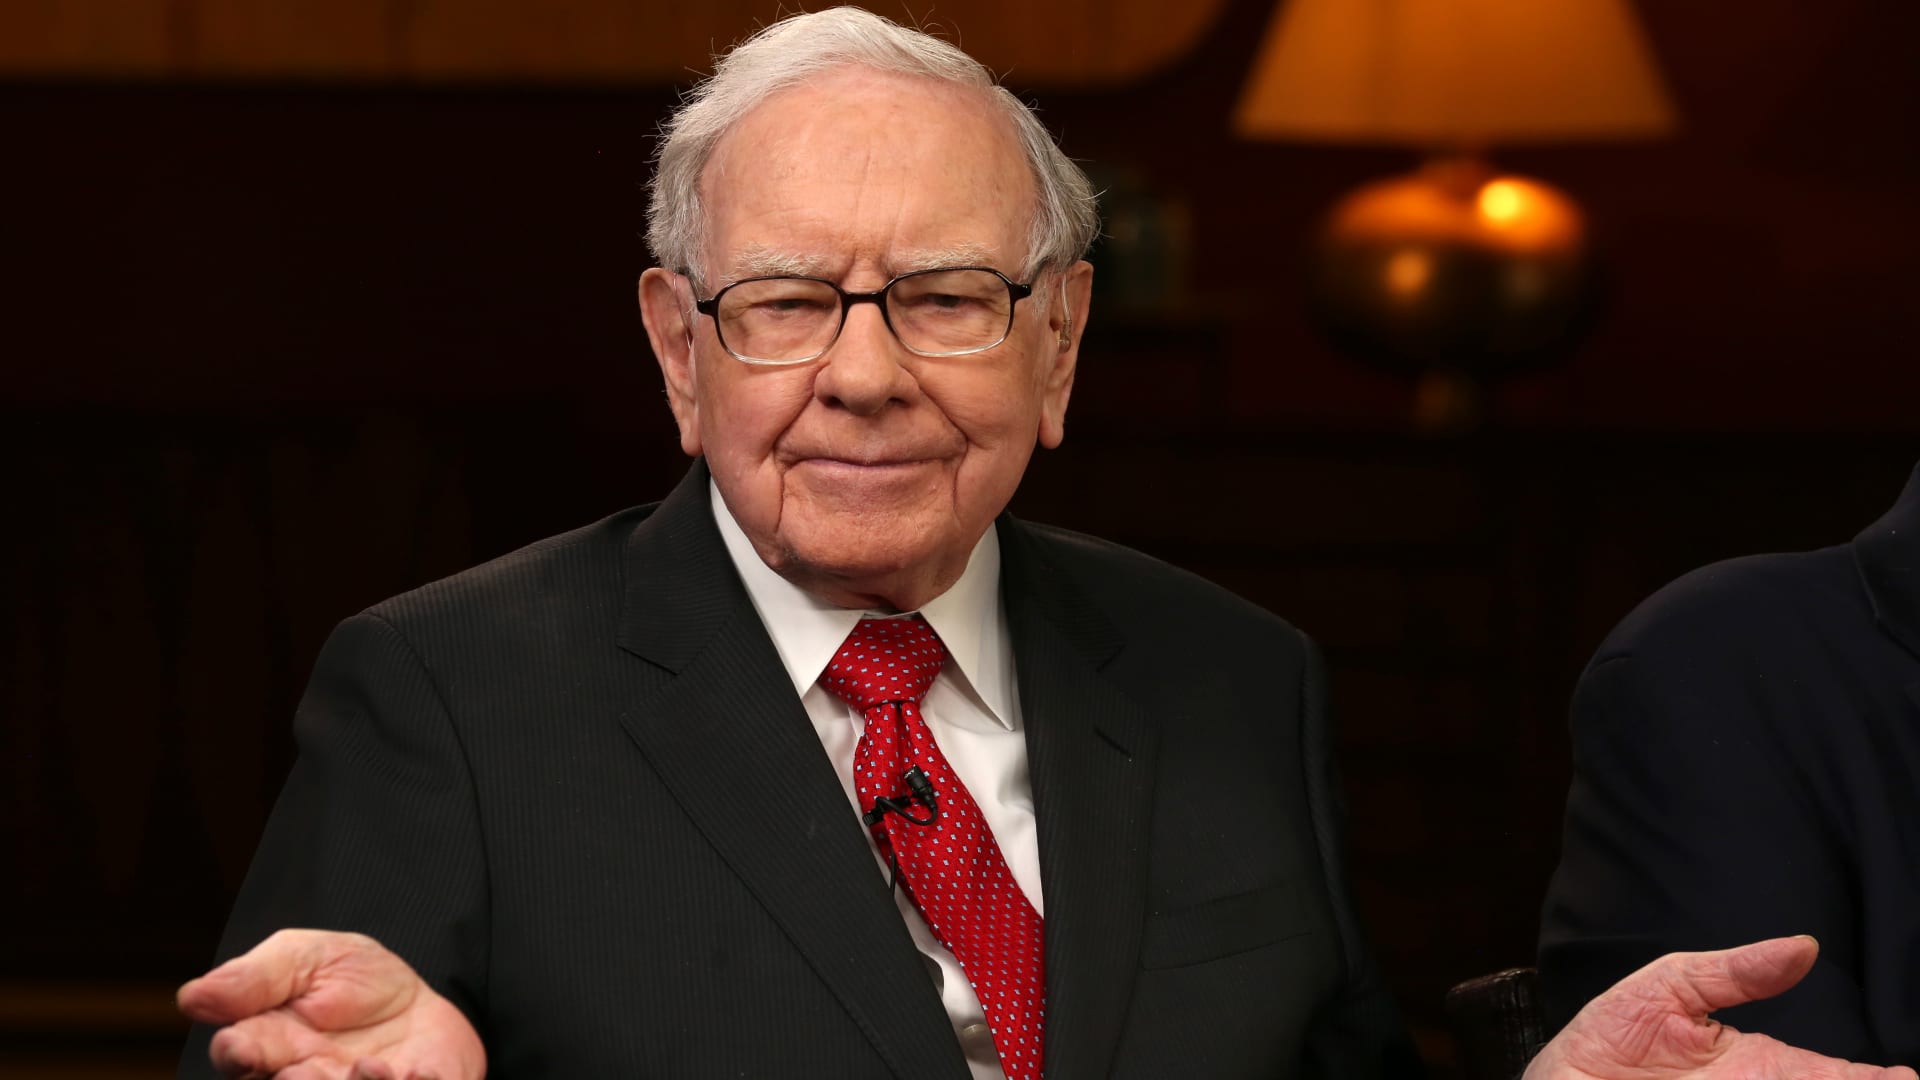 Warren Buffett’s stock shopping spree slows down even during market’s big pullback. Here’s why